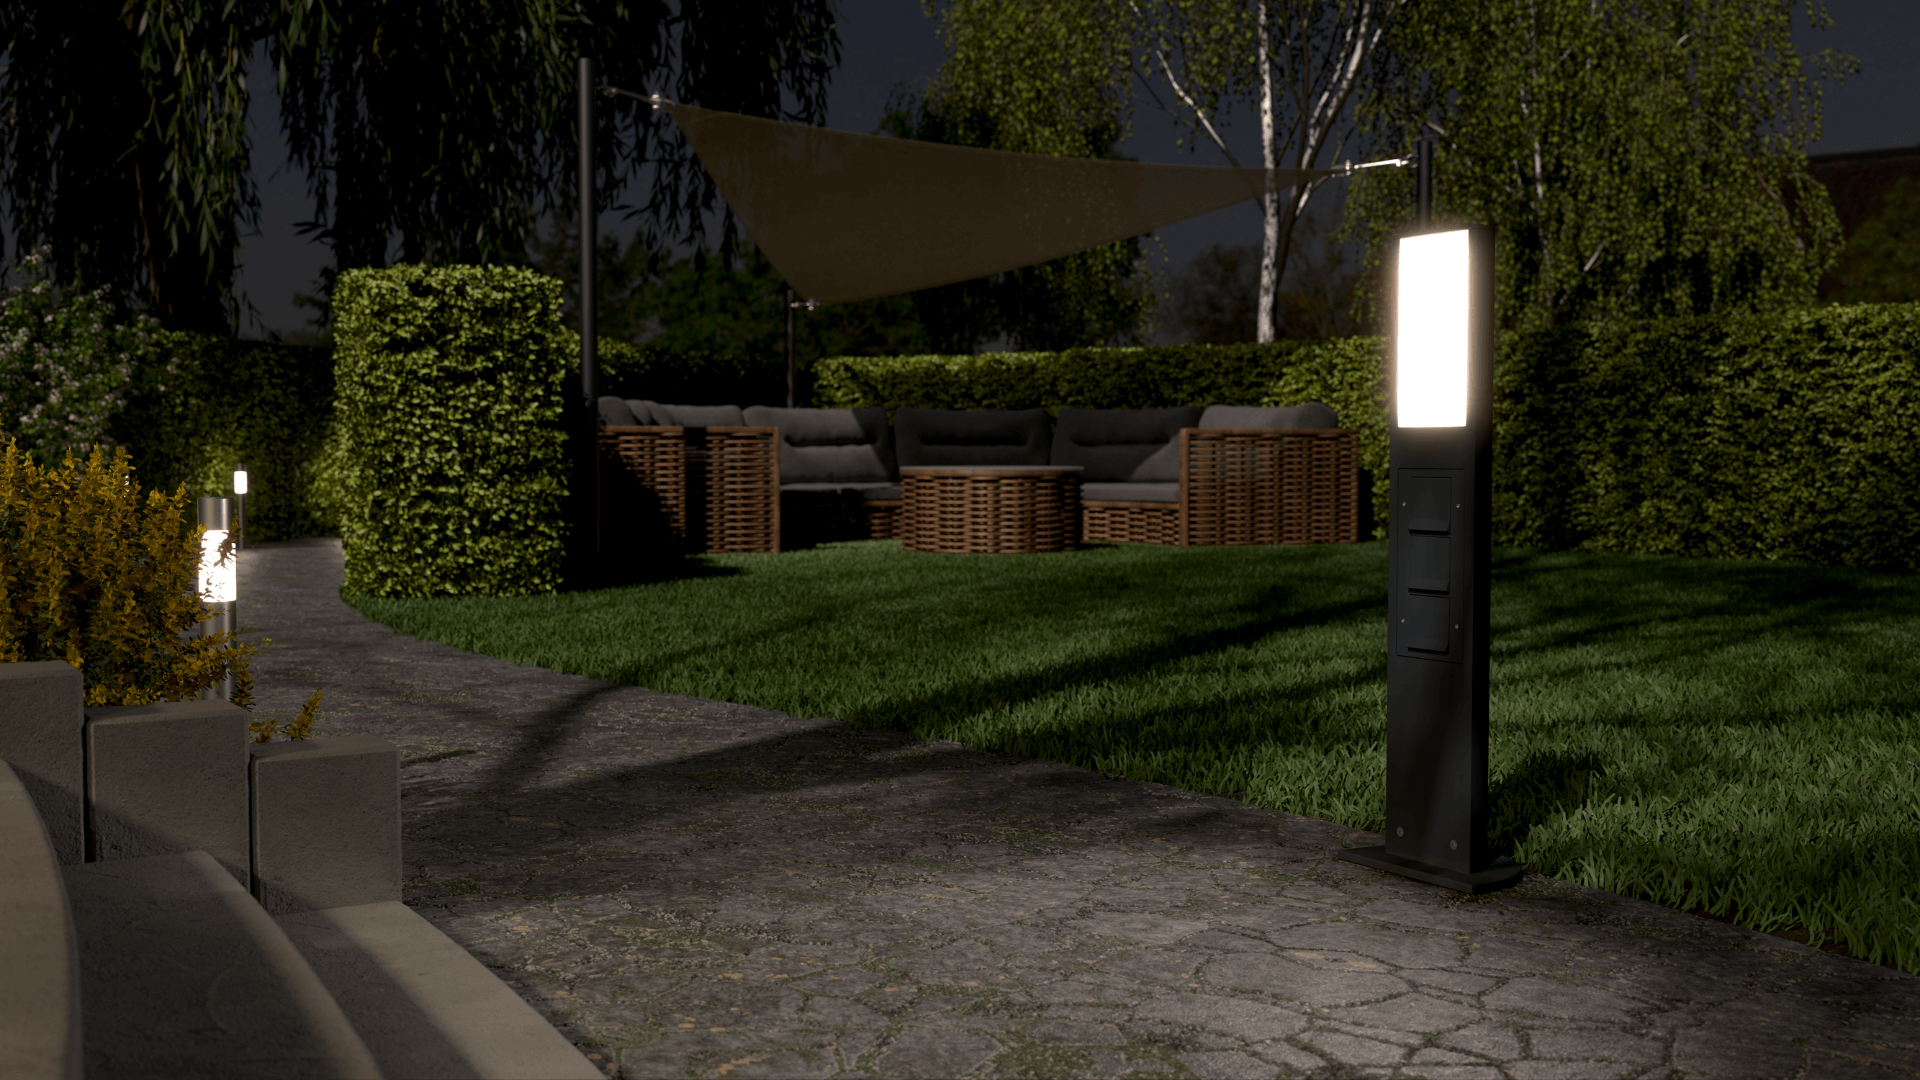 Power and lighting for your garden, balcony, or terrace: the modern Gira light and energy profile is high-quality and weather-proof.